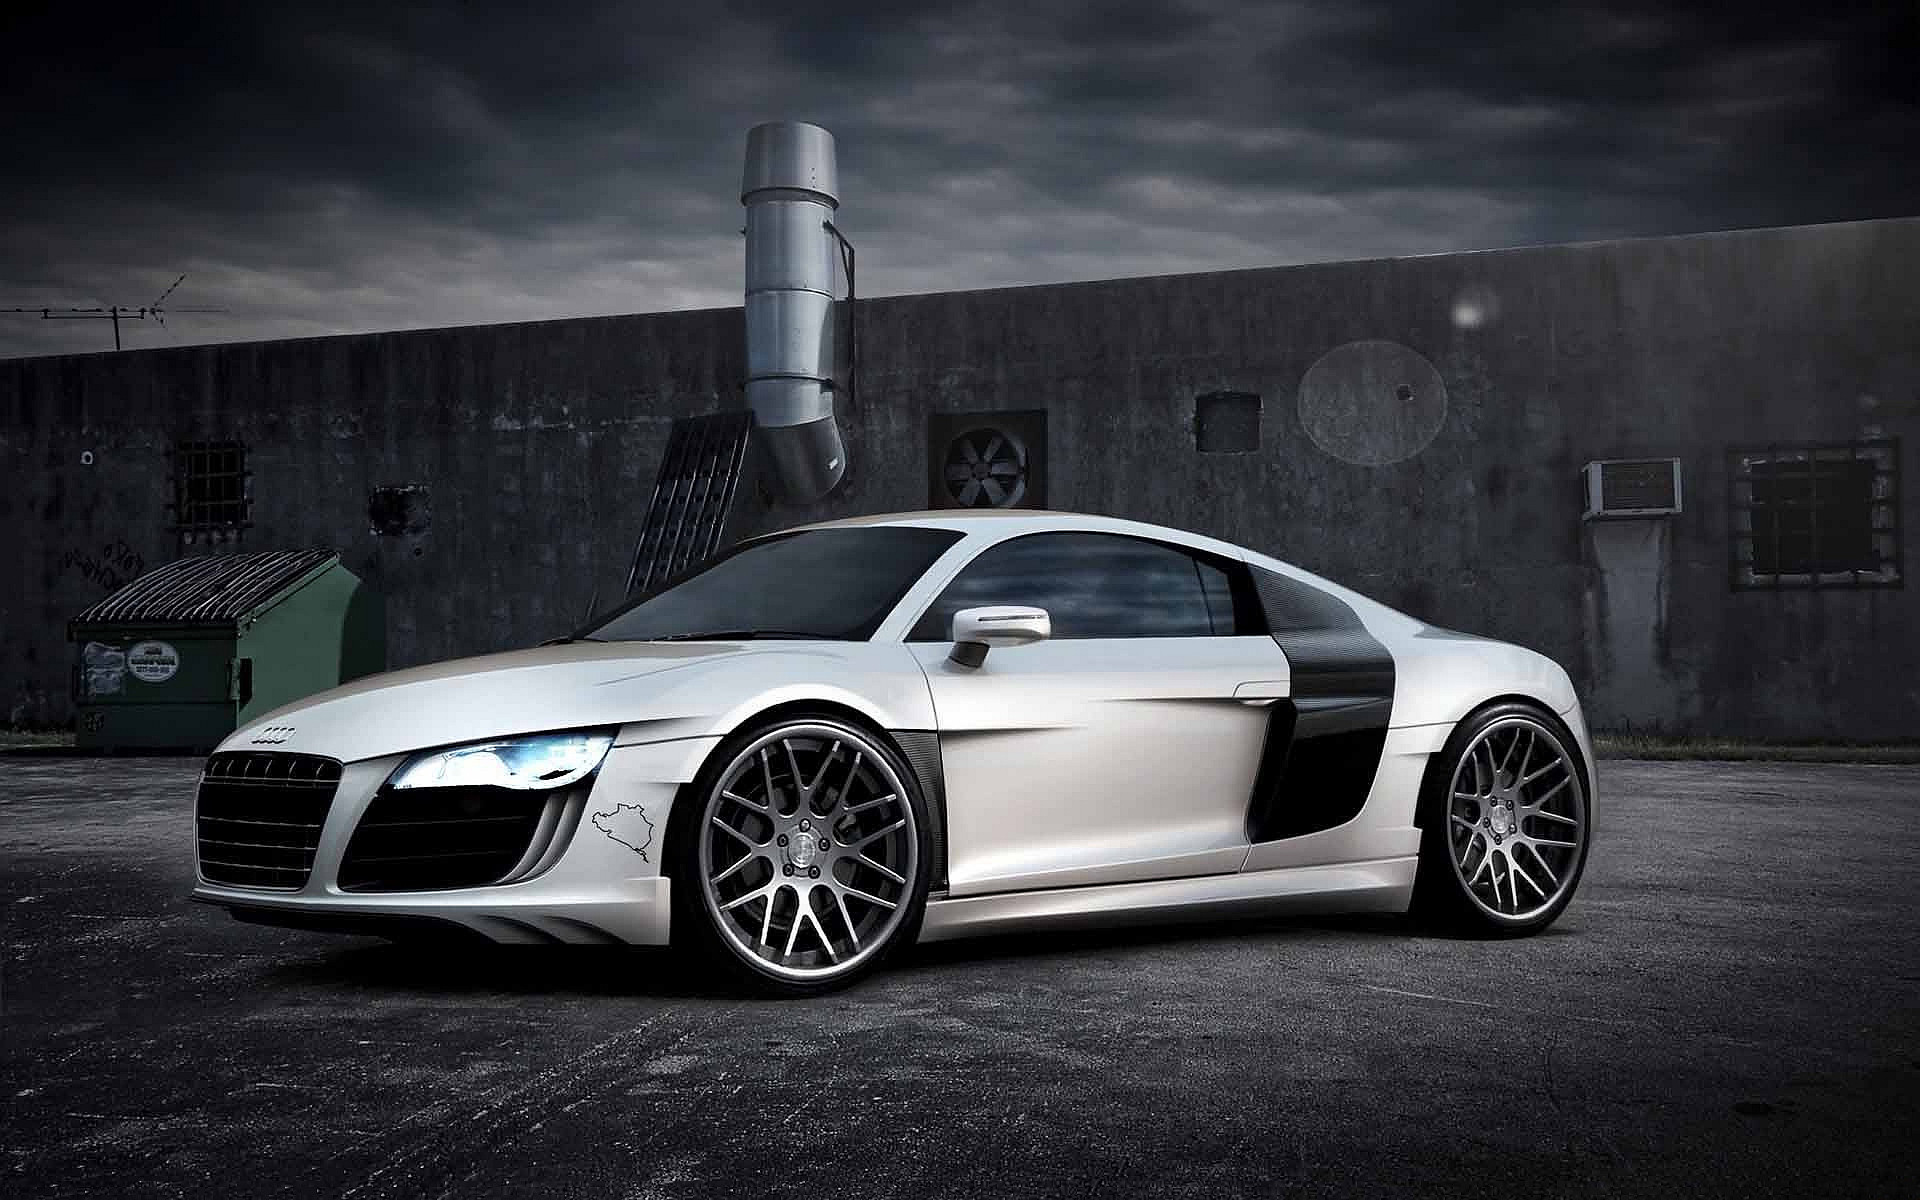 1920x1200 Awesome Audi R8 Wallpaper For Android | Audi Automotive Design | Pinterest  | Wallpaper, Audi r8 wallpaper and Hd desktop